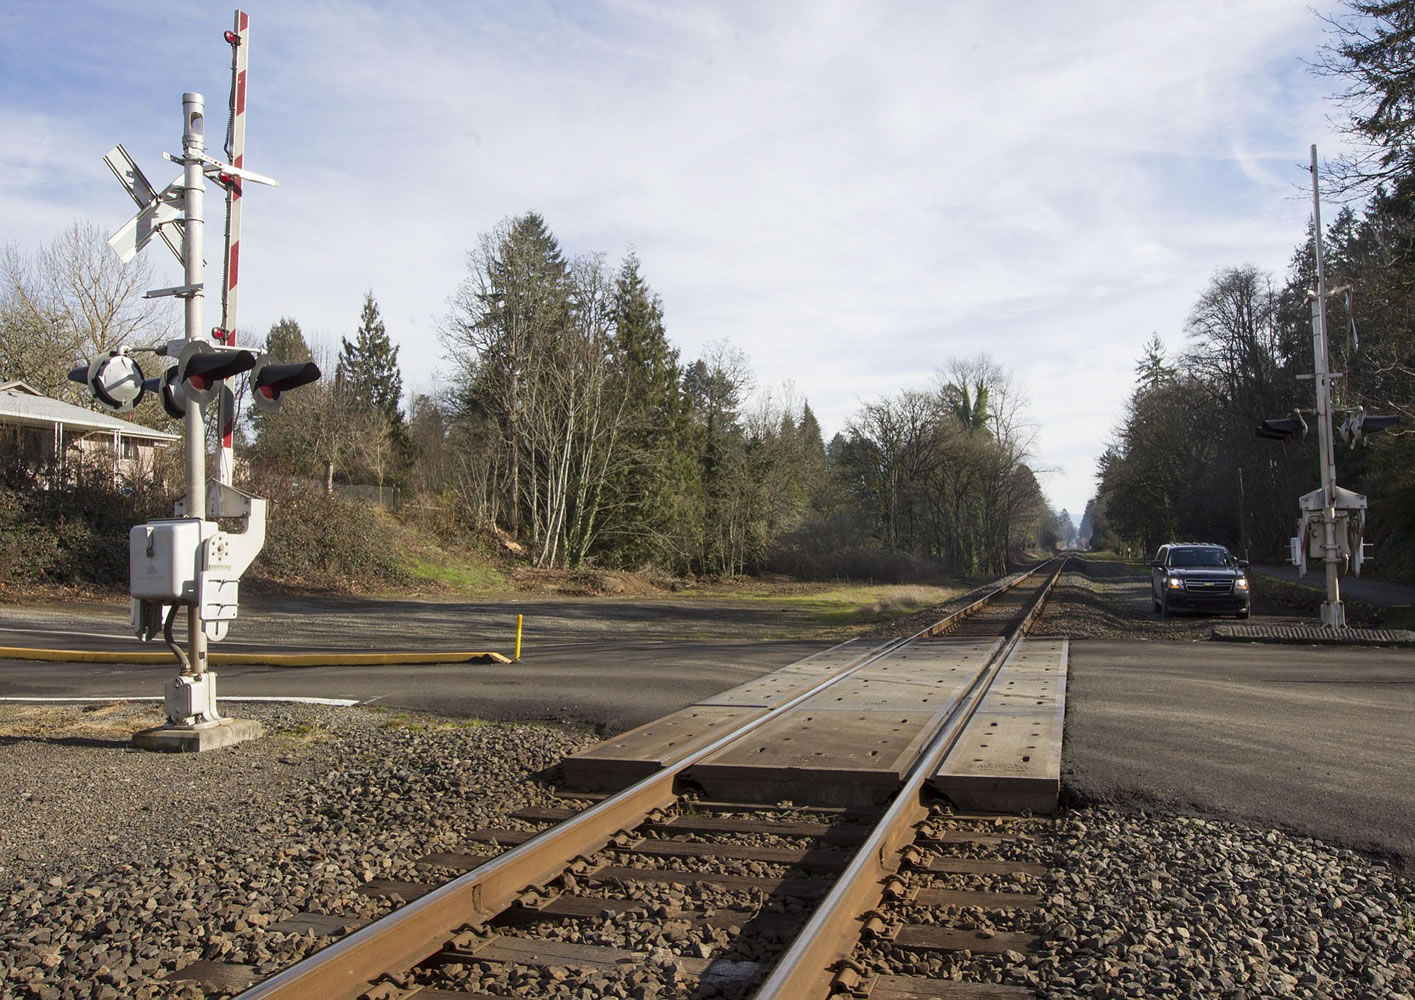 The scene where a 17-year-old pedestrian was struck and killed by a train early Monday morning in Vancouver Monday.